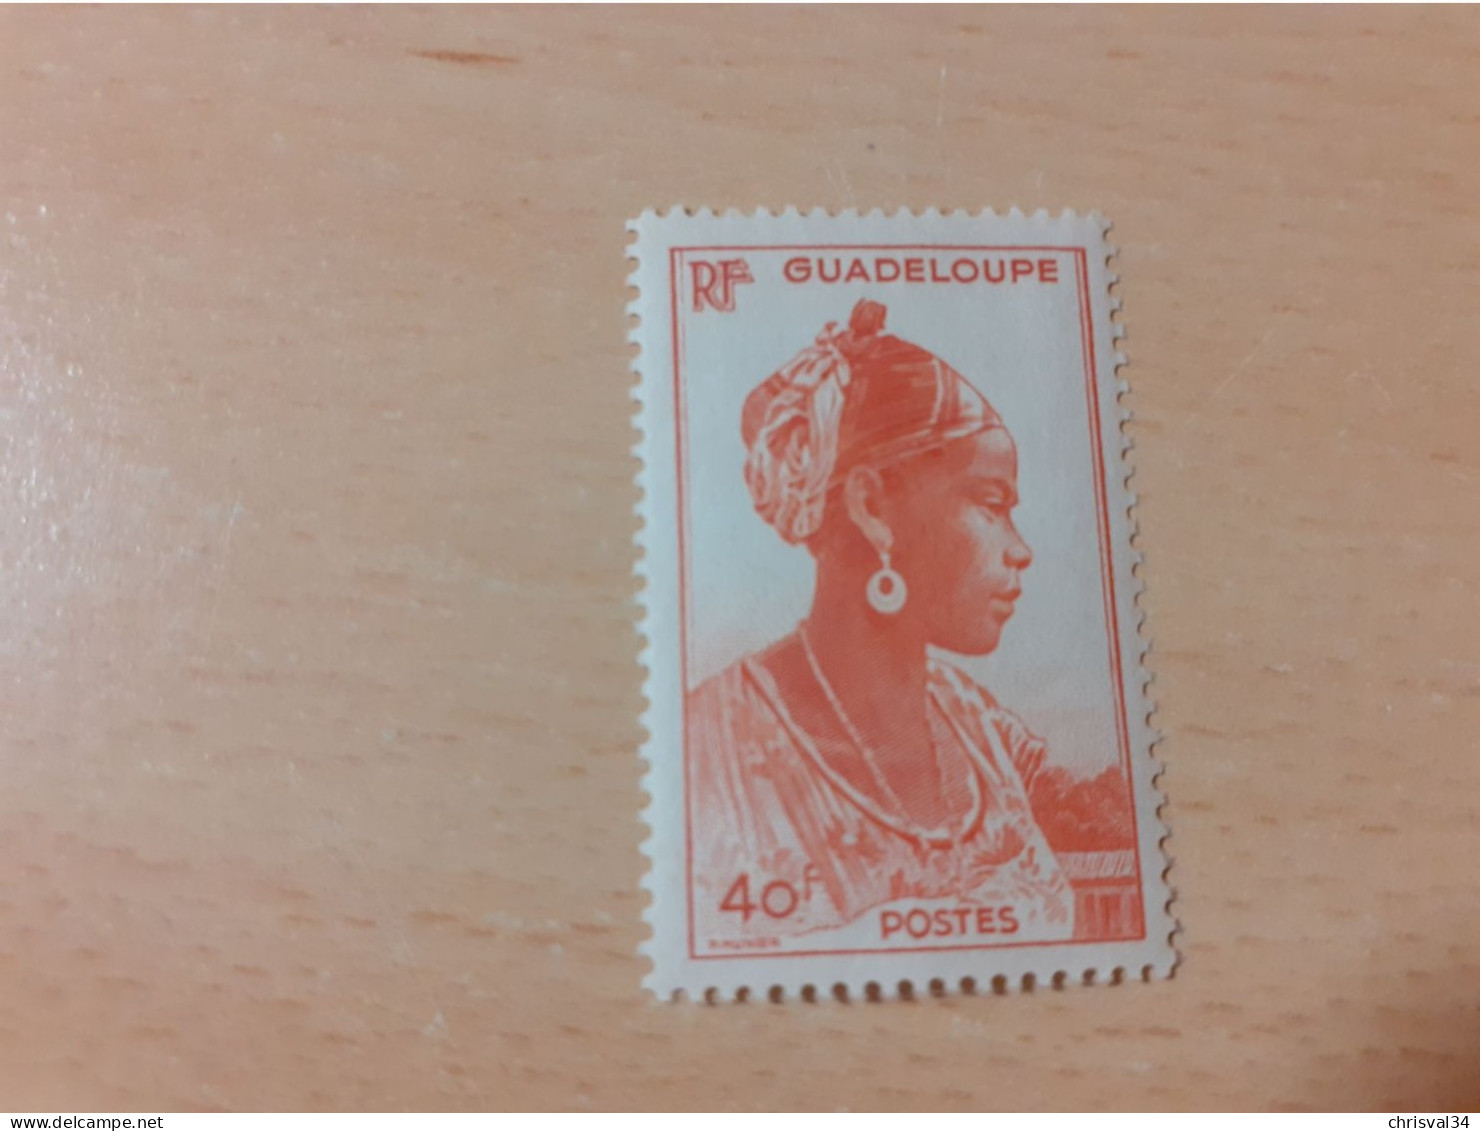 TIMBRE   GUADELOUPE       N  213    COTE  6,50   EUROS  NEUF  TRACE  CHARNIERE - Nuevos